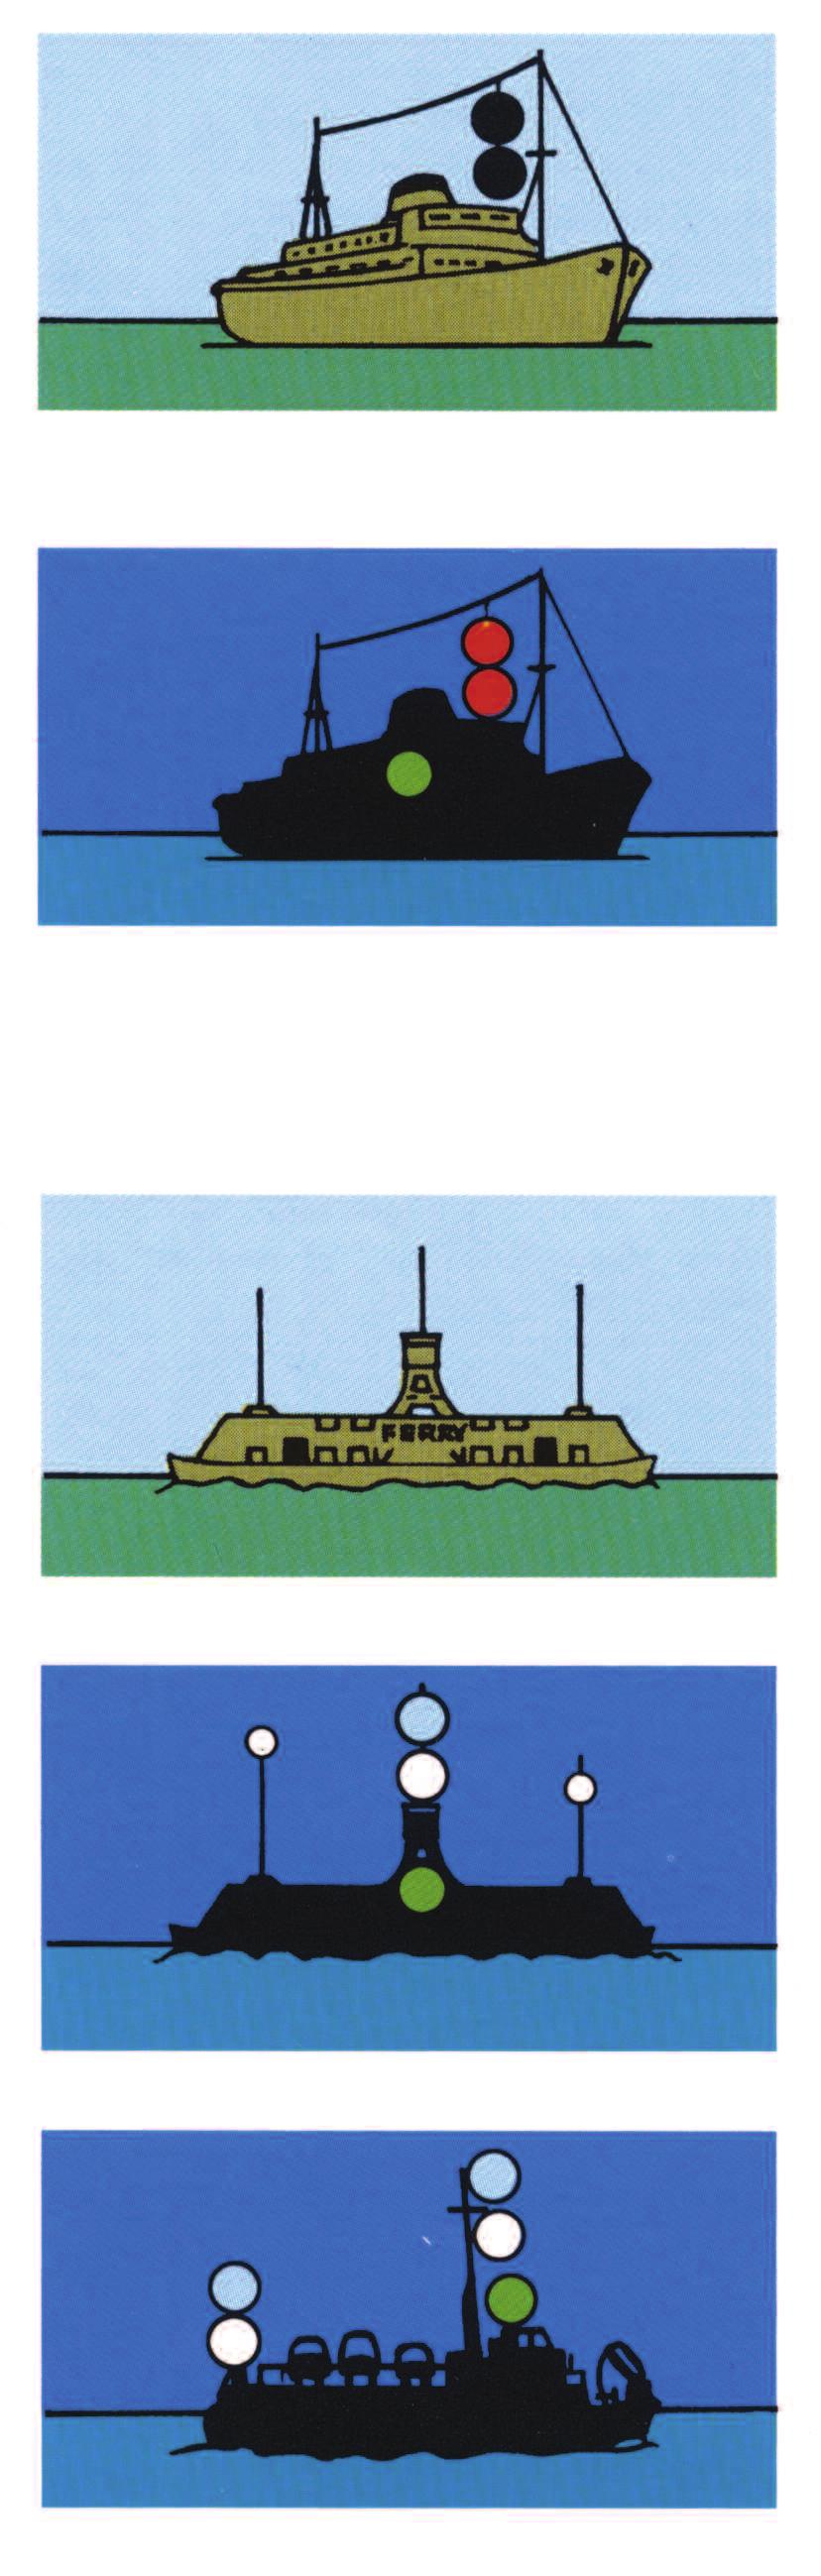 VESSELS NOT UNDER COMMAND Rule 27(a) A vessel which is not under command shall carry two vertically placed black balls or shapes 2 metres apart.